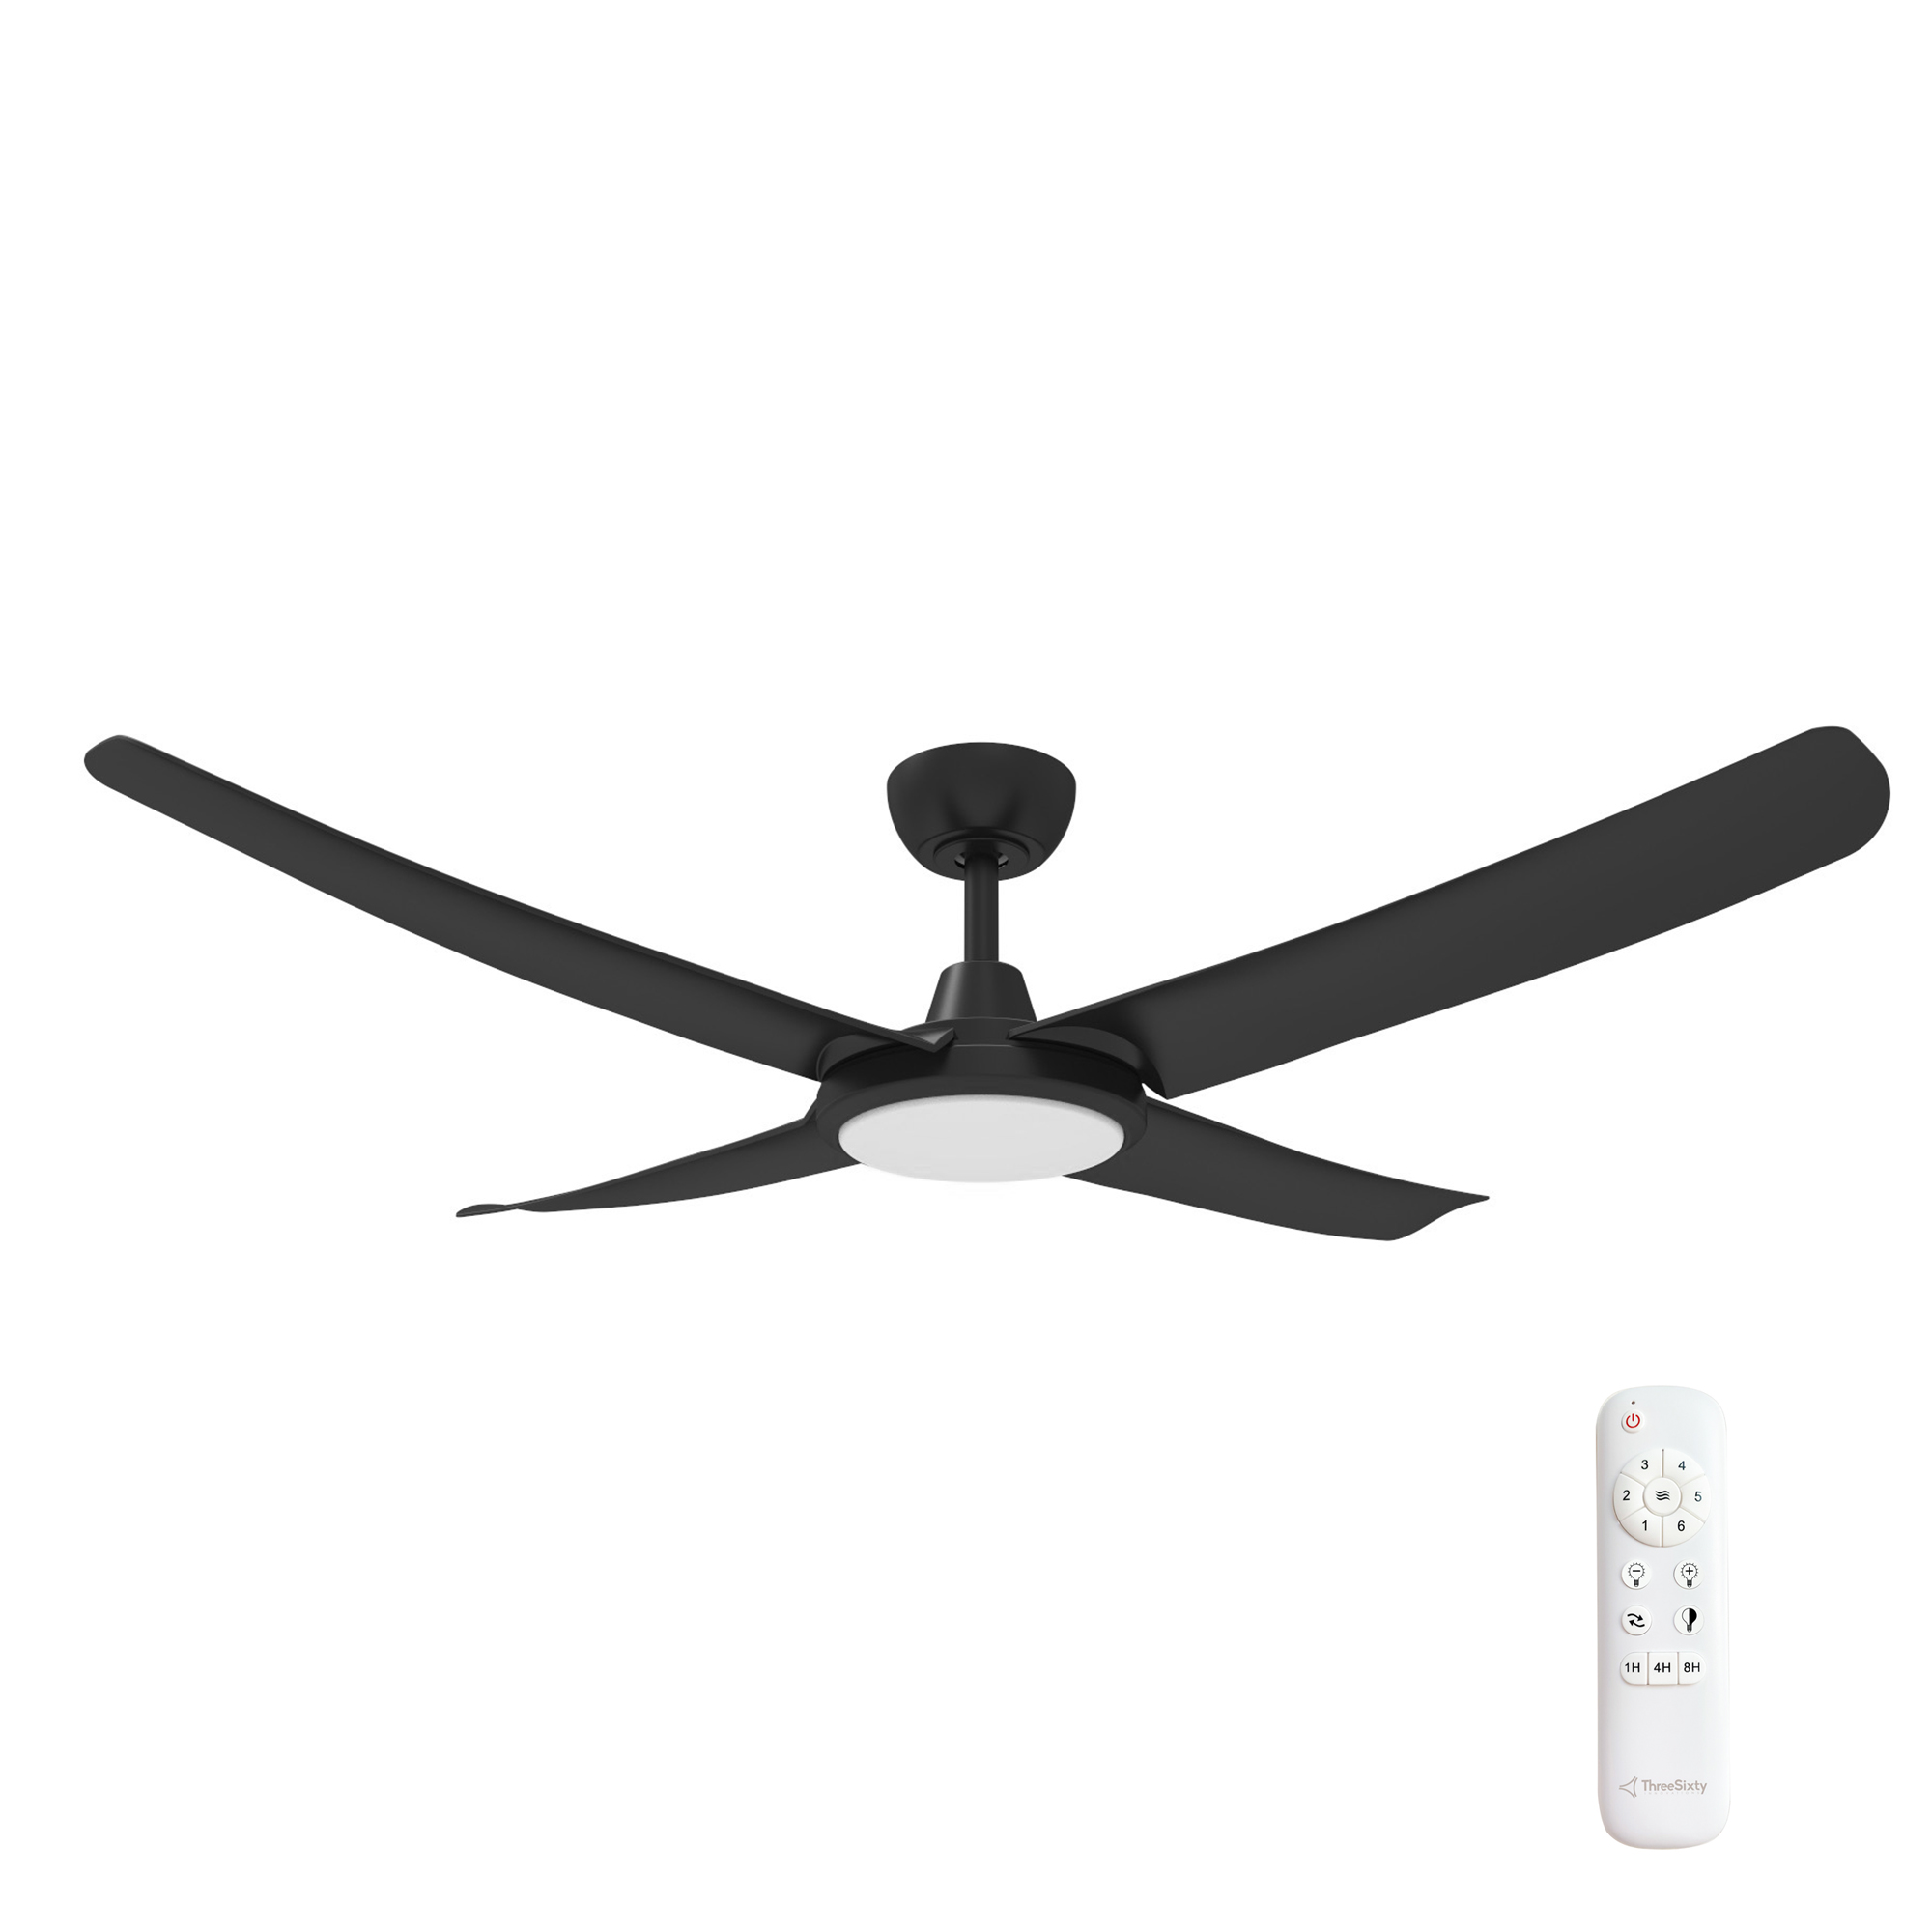 52" FlatJET DC Ceiling Fan in Black with 24W Dimmable CCT LED Light (4 Blades)